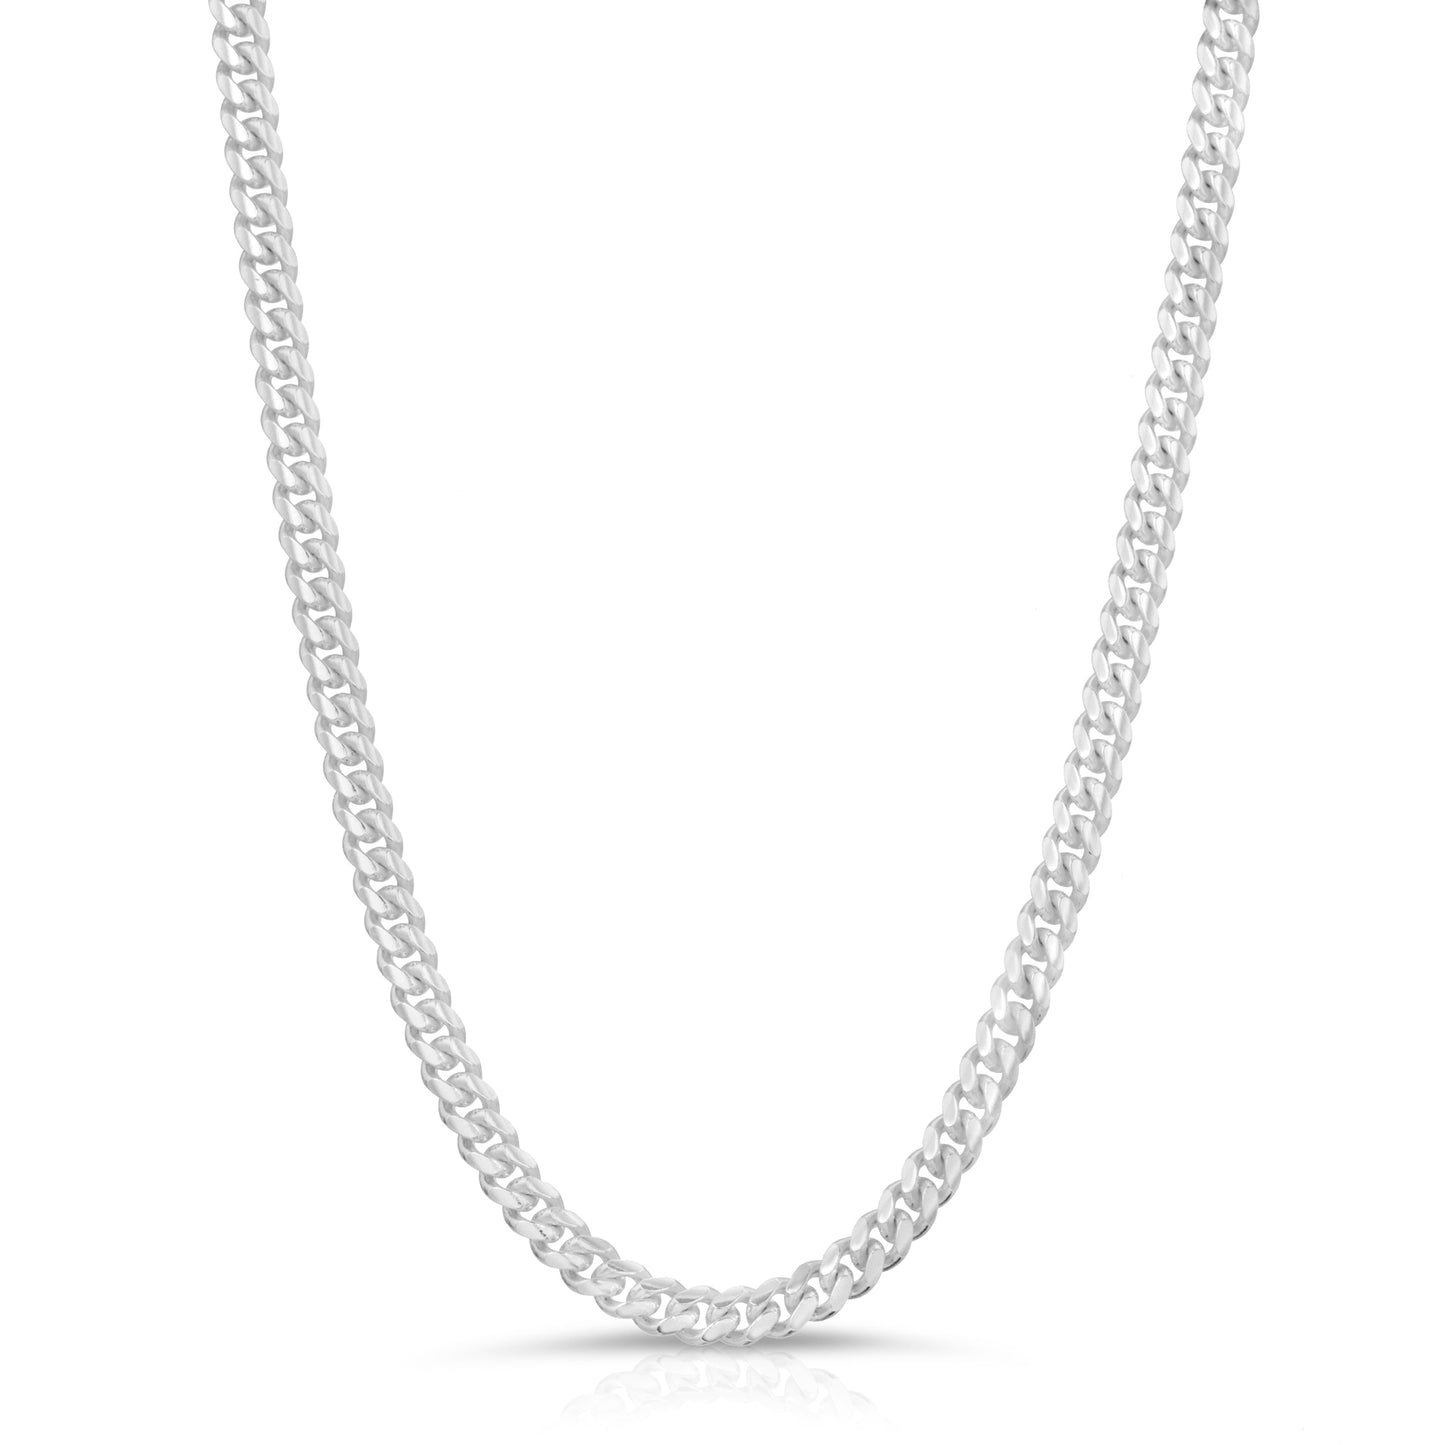 4mm Sterling Silver Miami Cuban Link Chain